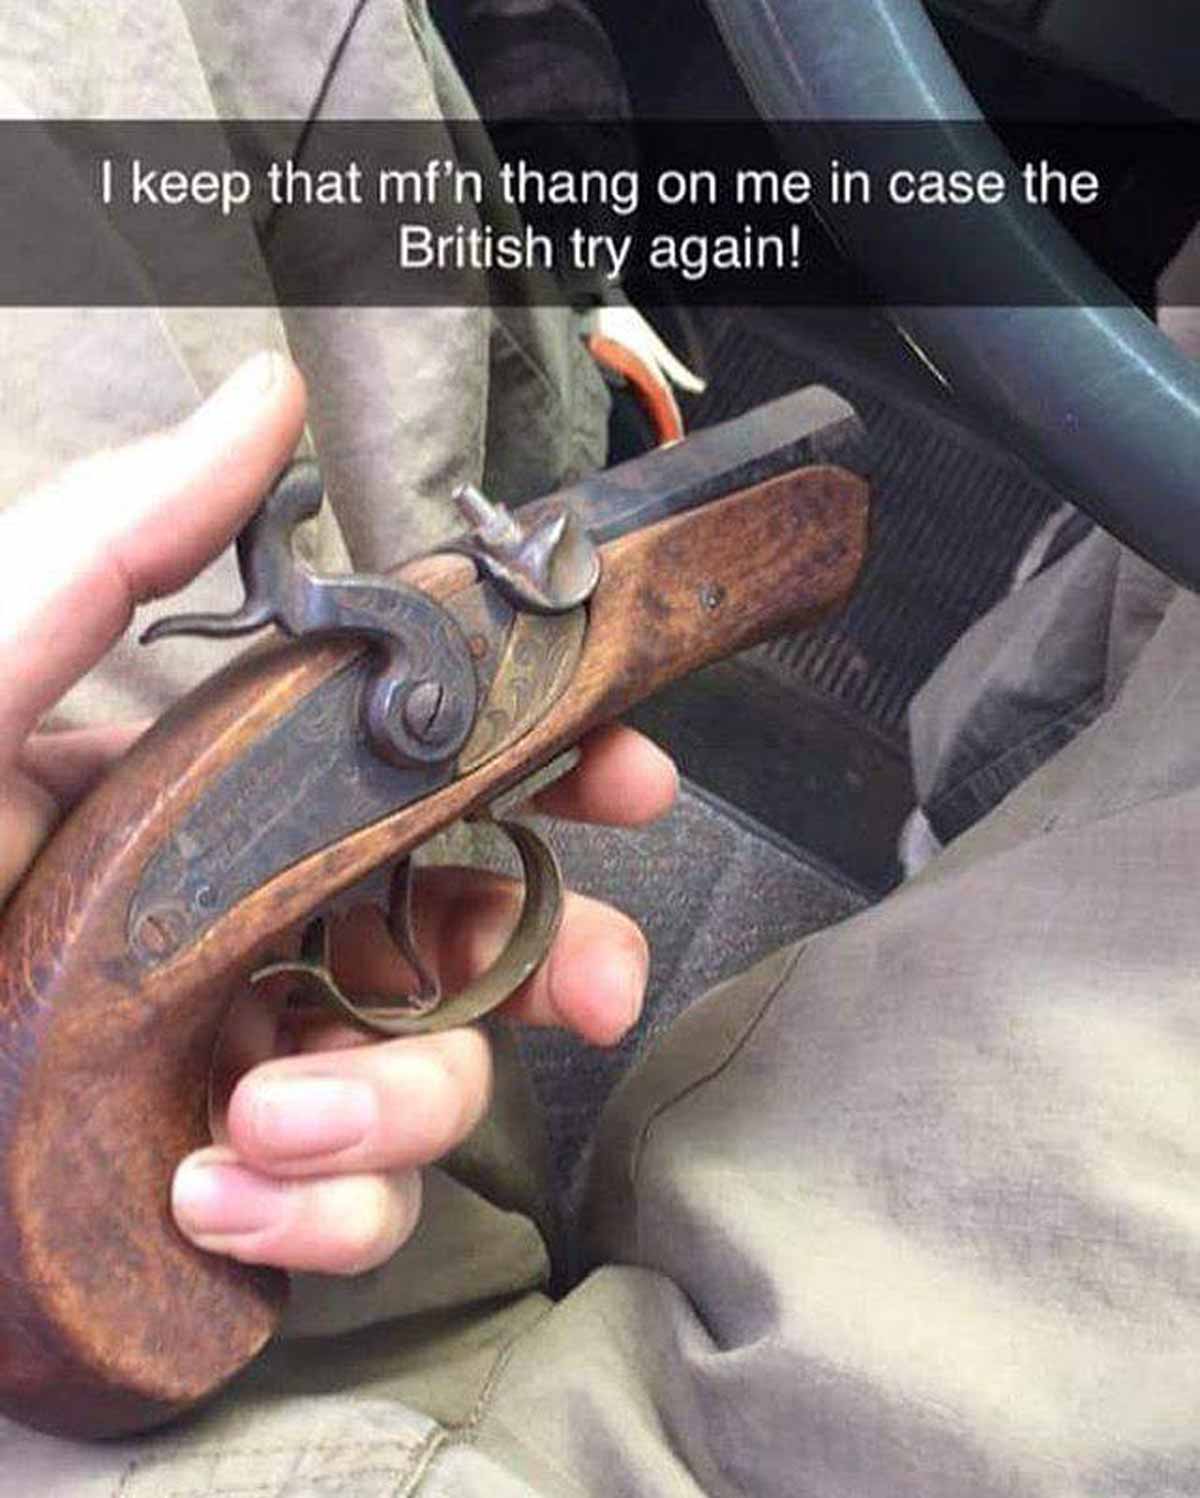 Guy holding a tiny old hand pistol that says 'i keep that mf'n thang on me in case the British try again!'